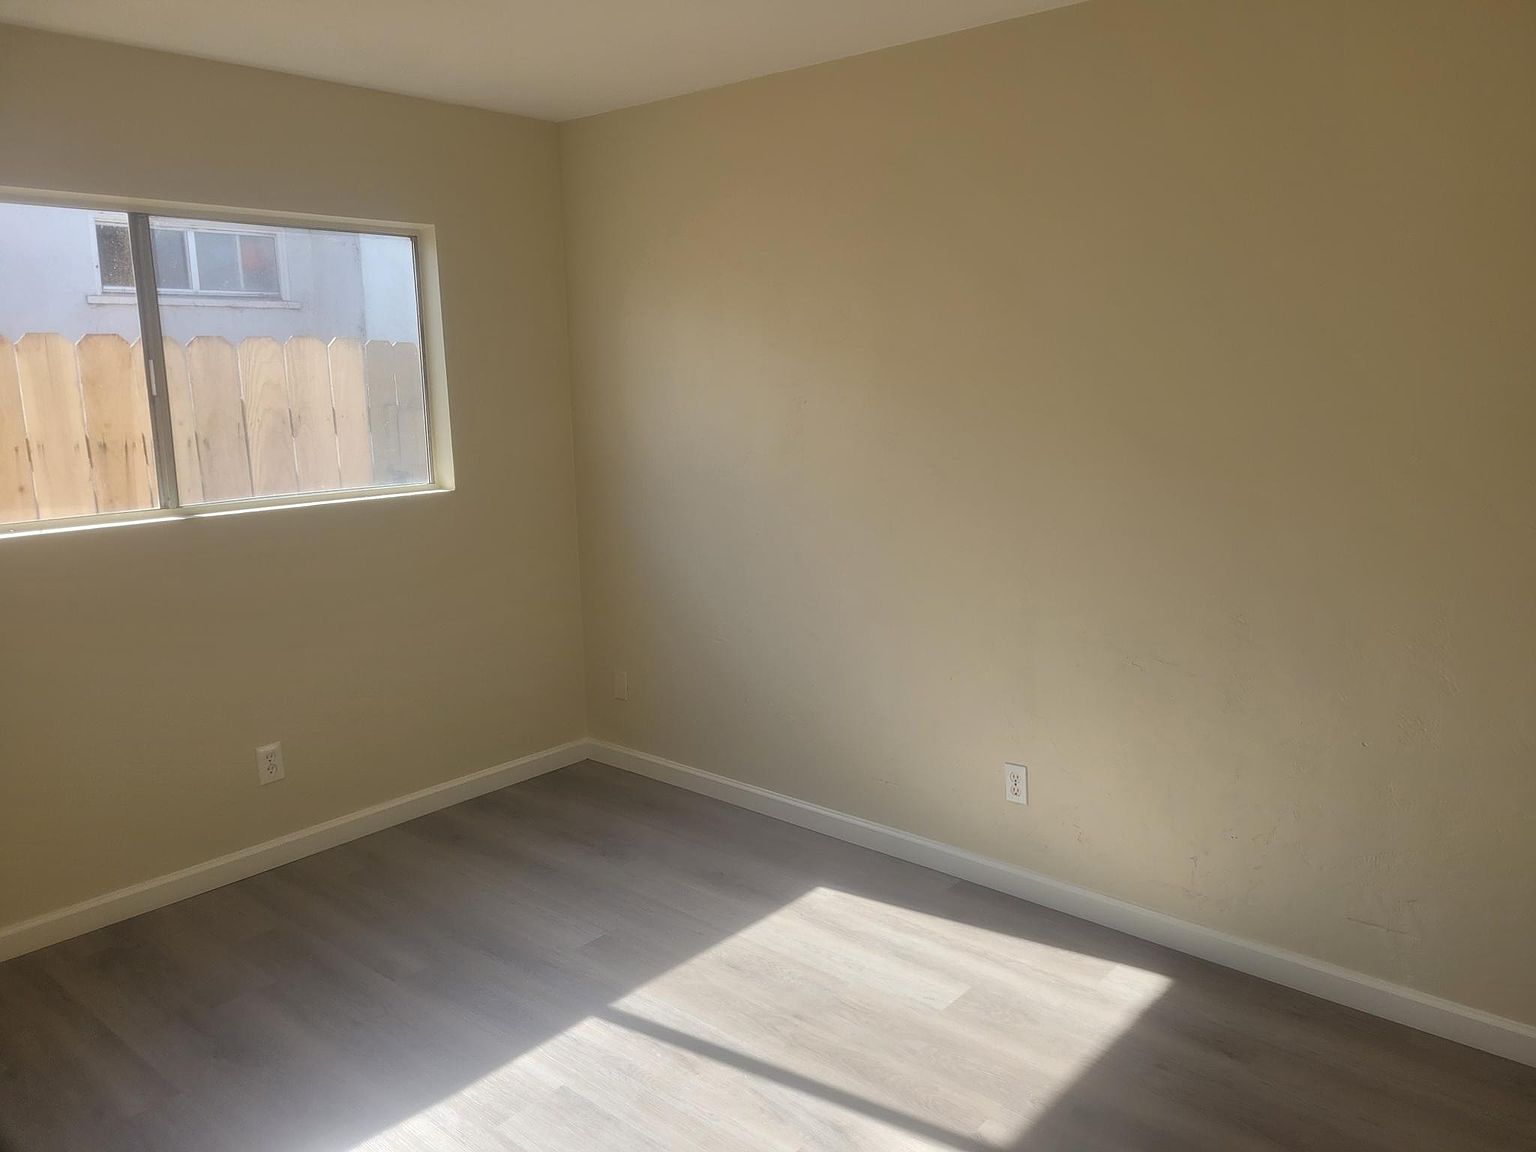 1540-1542 E 17th St, National City, CA 91950 | Zillow